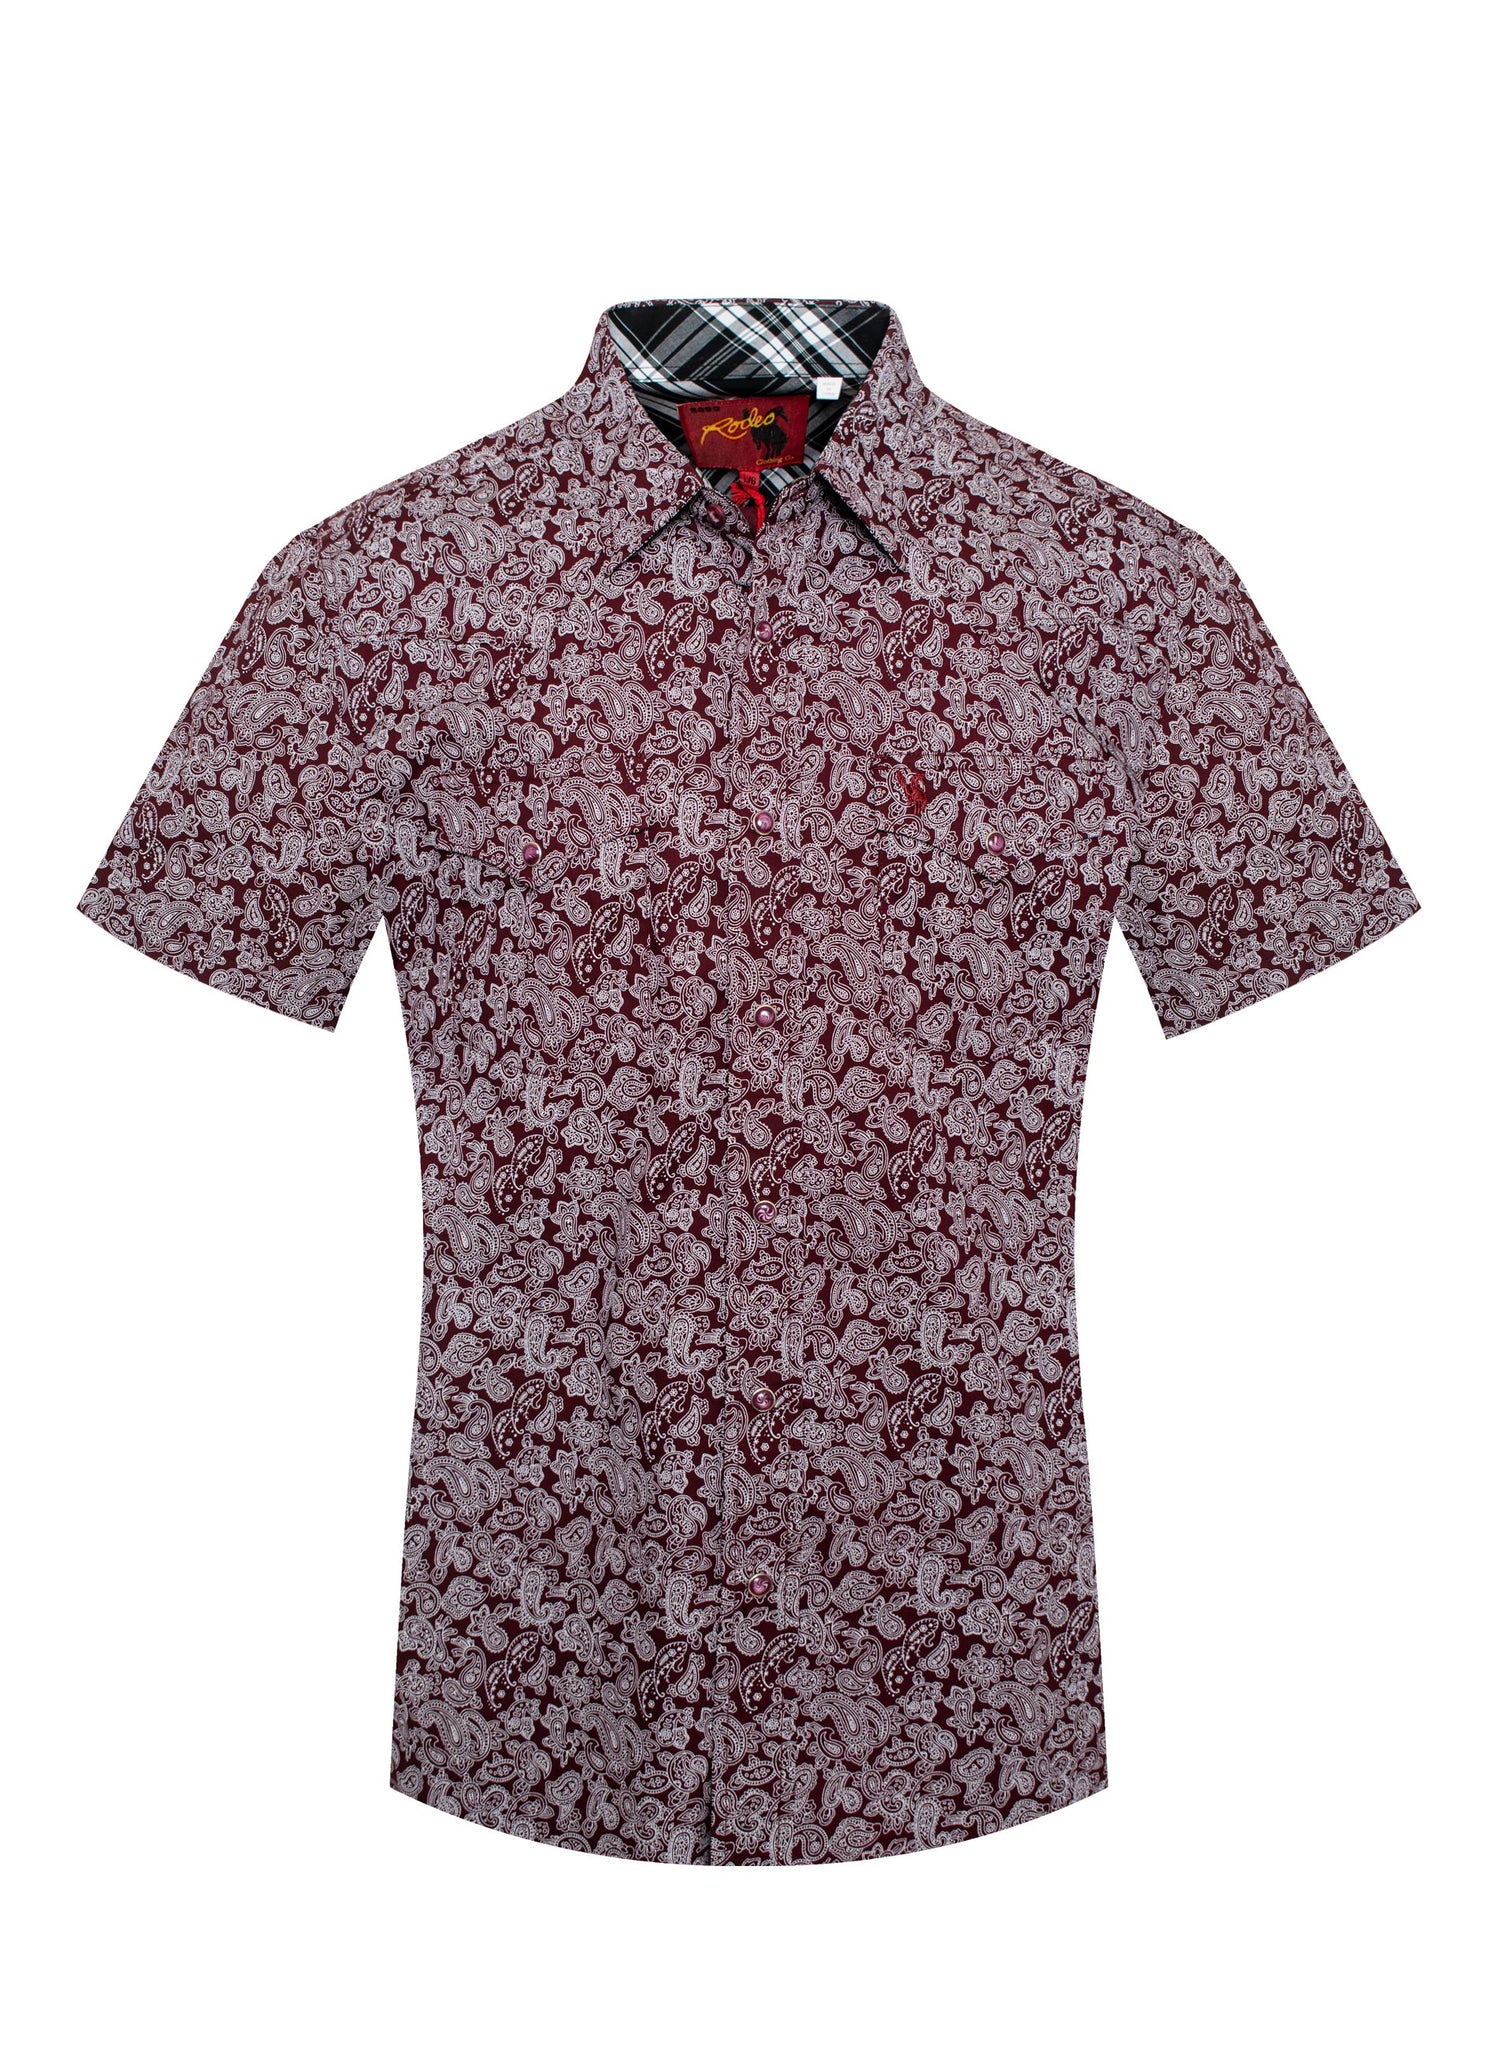 Men's Western Short Sleeve Cotton Print Shirts With Snap Buttons